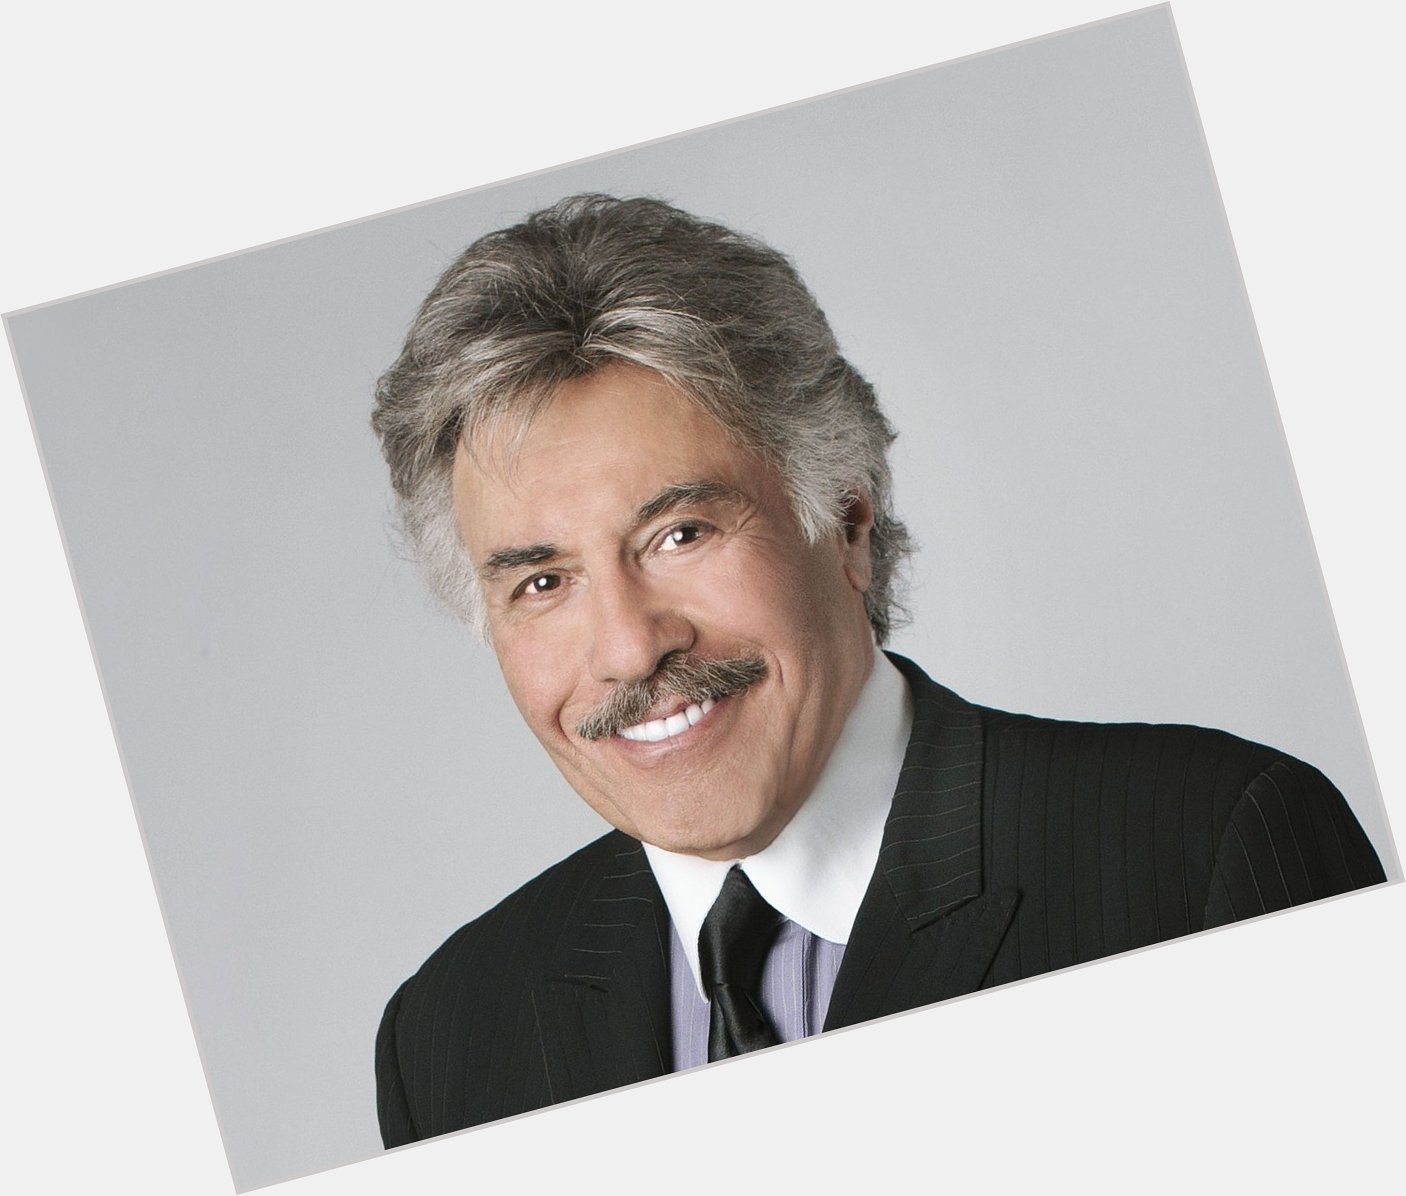 A Big BOSS Happy Birthday today to Tony Orlando from all of us at The Boss! 